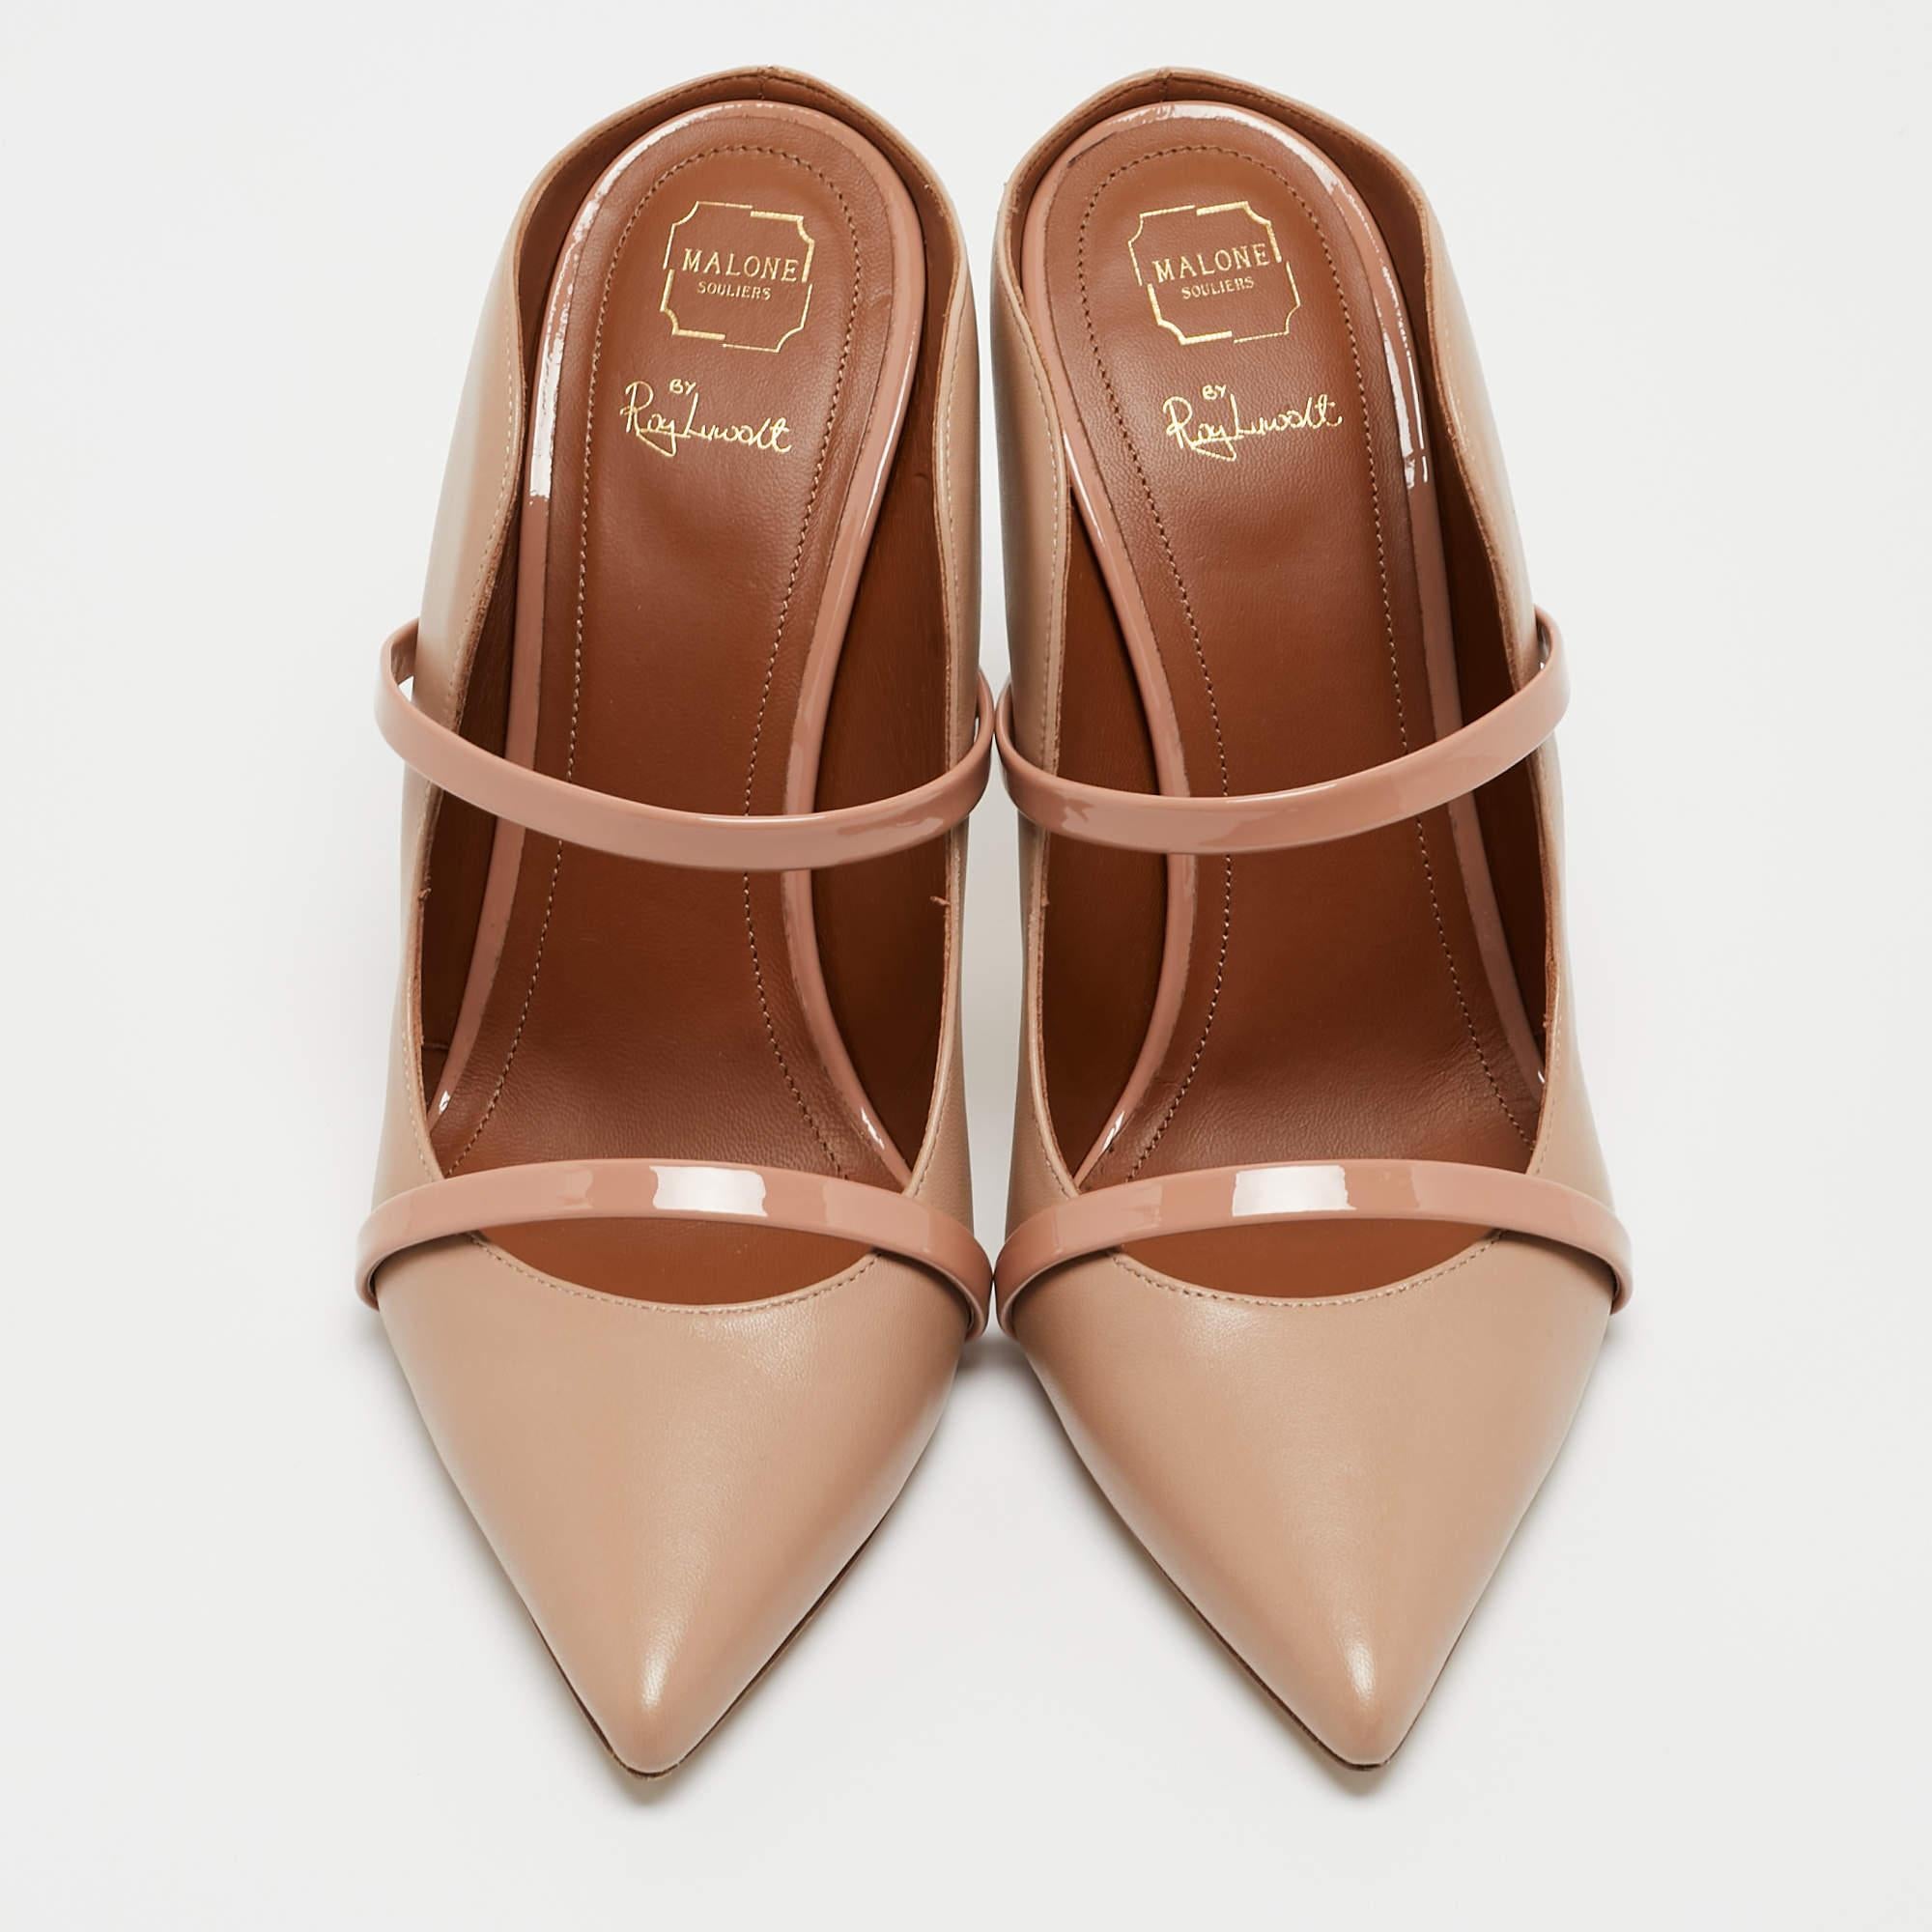 Admired for its waved silhouette, these Malone Souliers mules will make sure the spotlight follows you everywhere. The strap detailing across the beige upper enhances its contemporary shape. Created from leather, they are complete with a slip-on